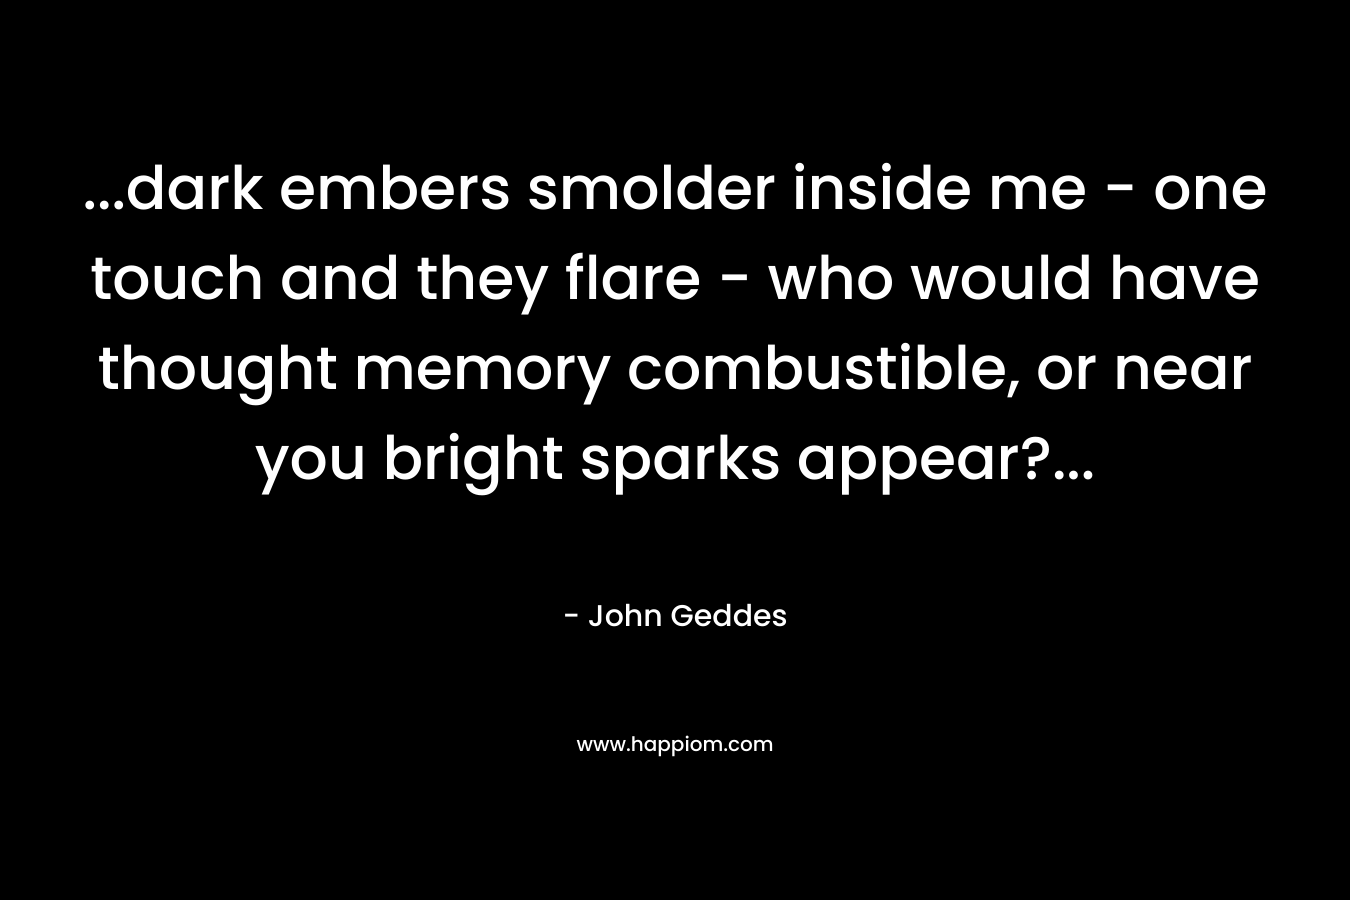 ...dark embers smolder inside me - one touch and they flare - who would have thought memory combustible, or near you bright sparks appear?...